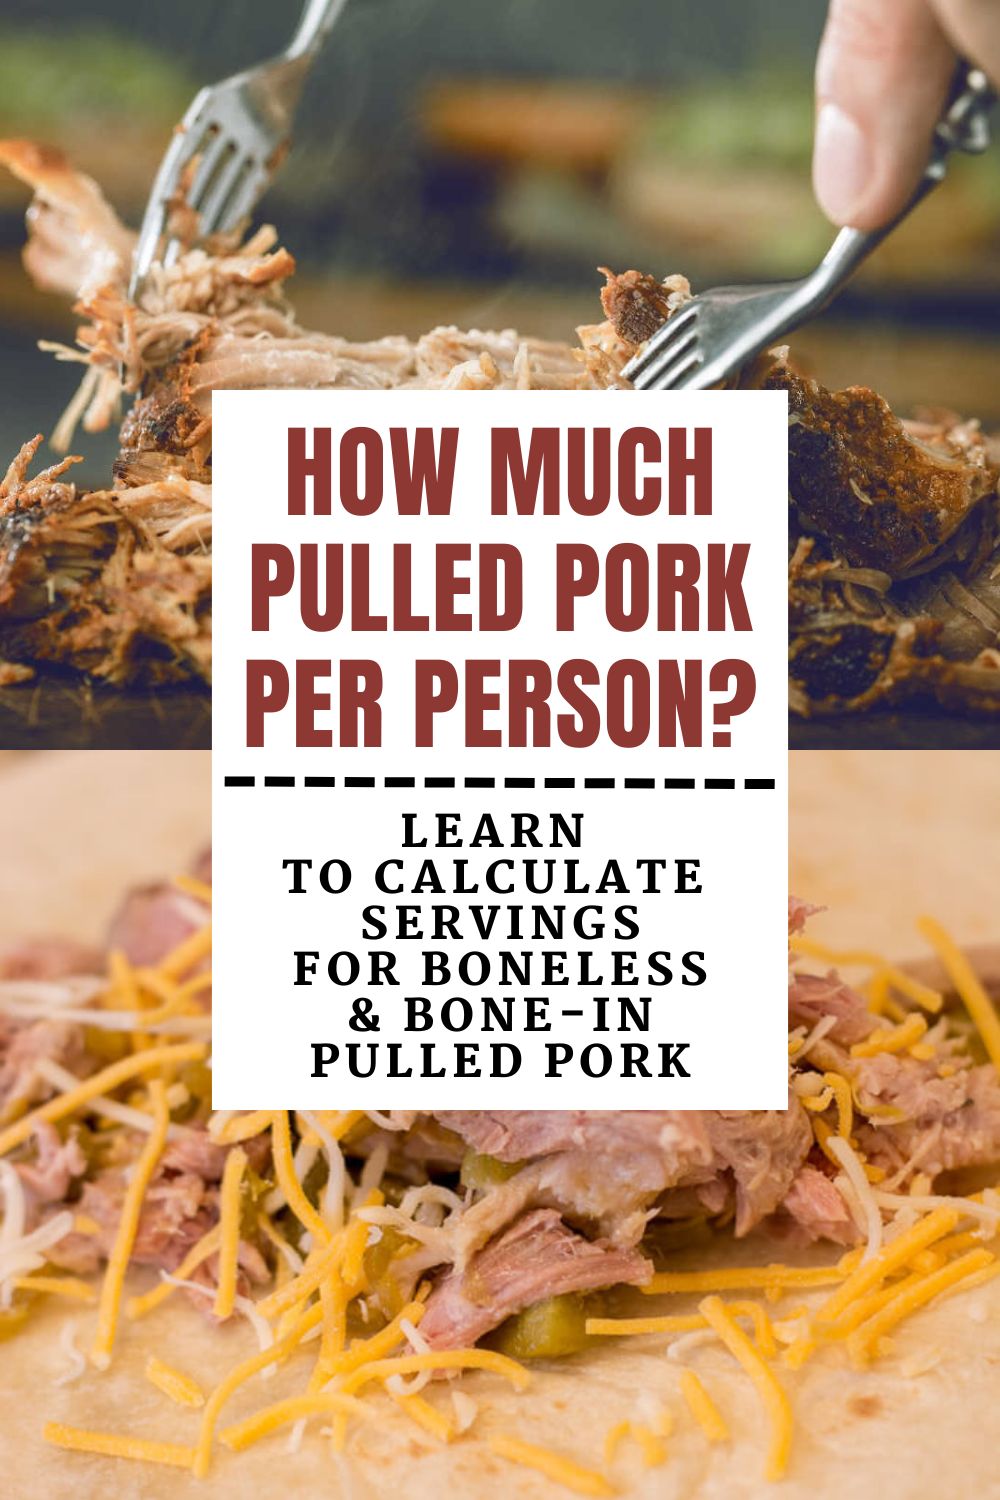 How Much Pulled Pork Per Person